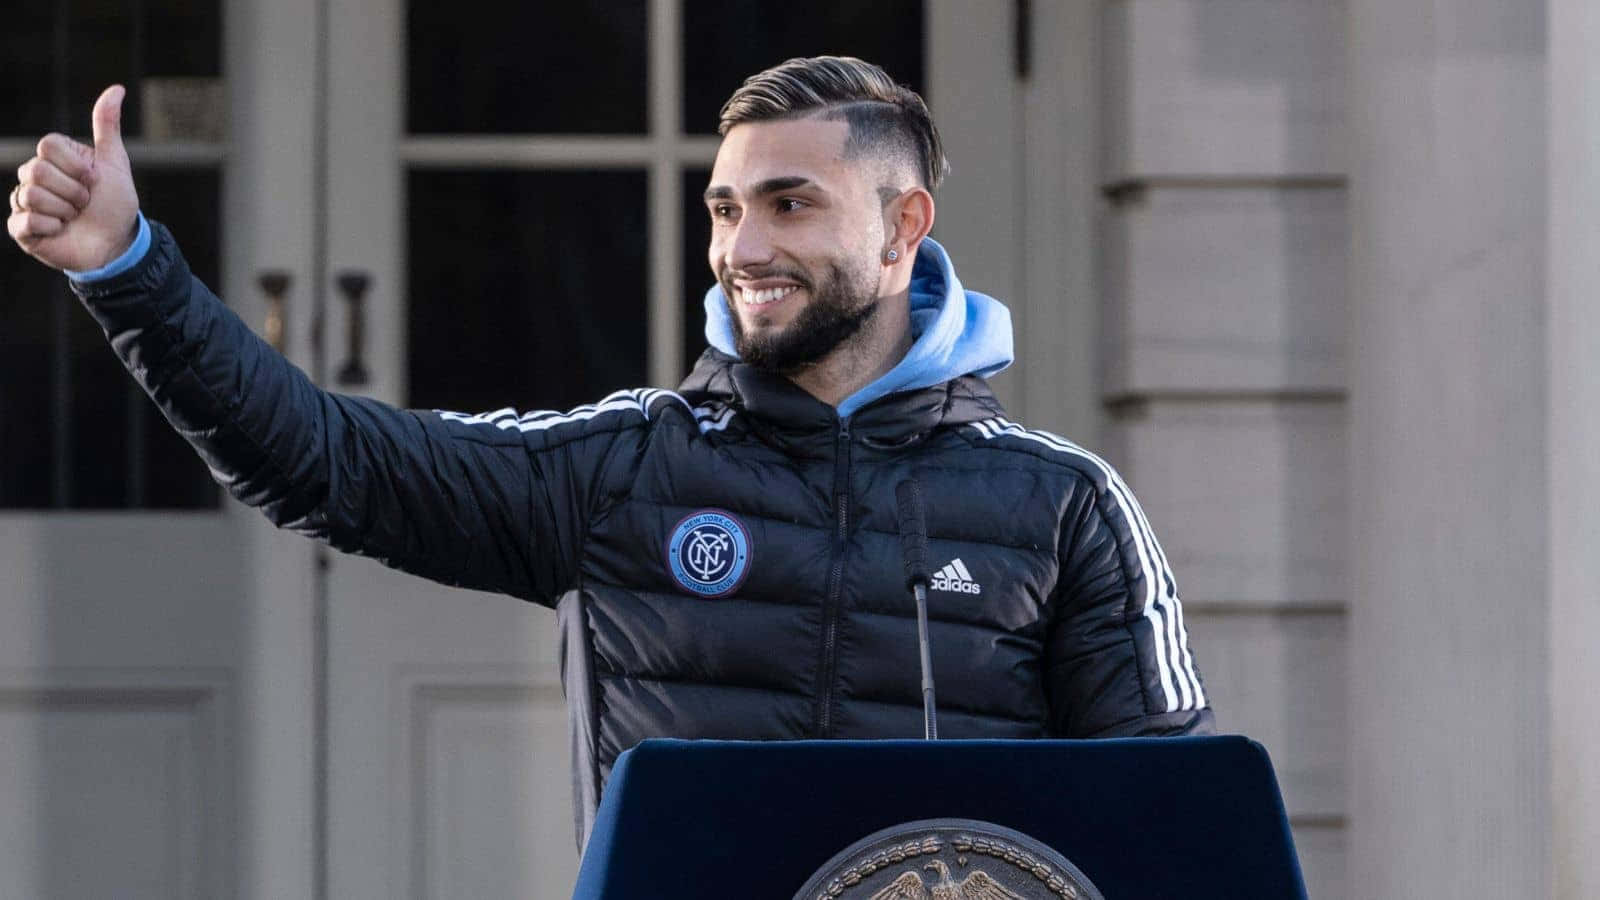 Valentincastellanos Come Speaker Del New York City Fc This Is Not A Direct Translation, But It Conveys The Message In A More Natural And Idiomatic Way In Italian. Sfondo